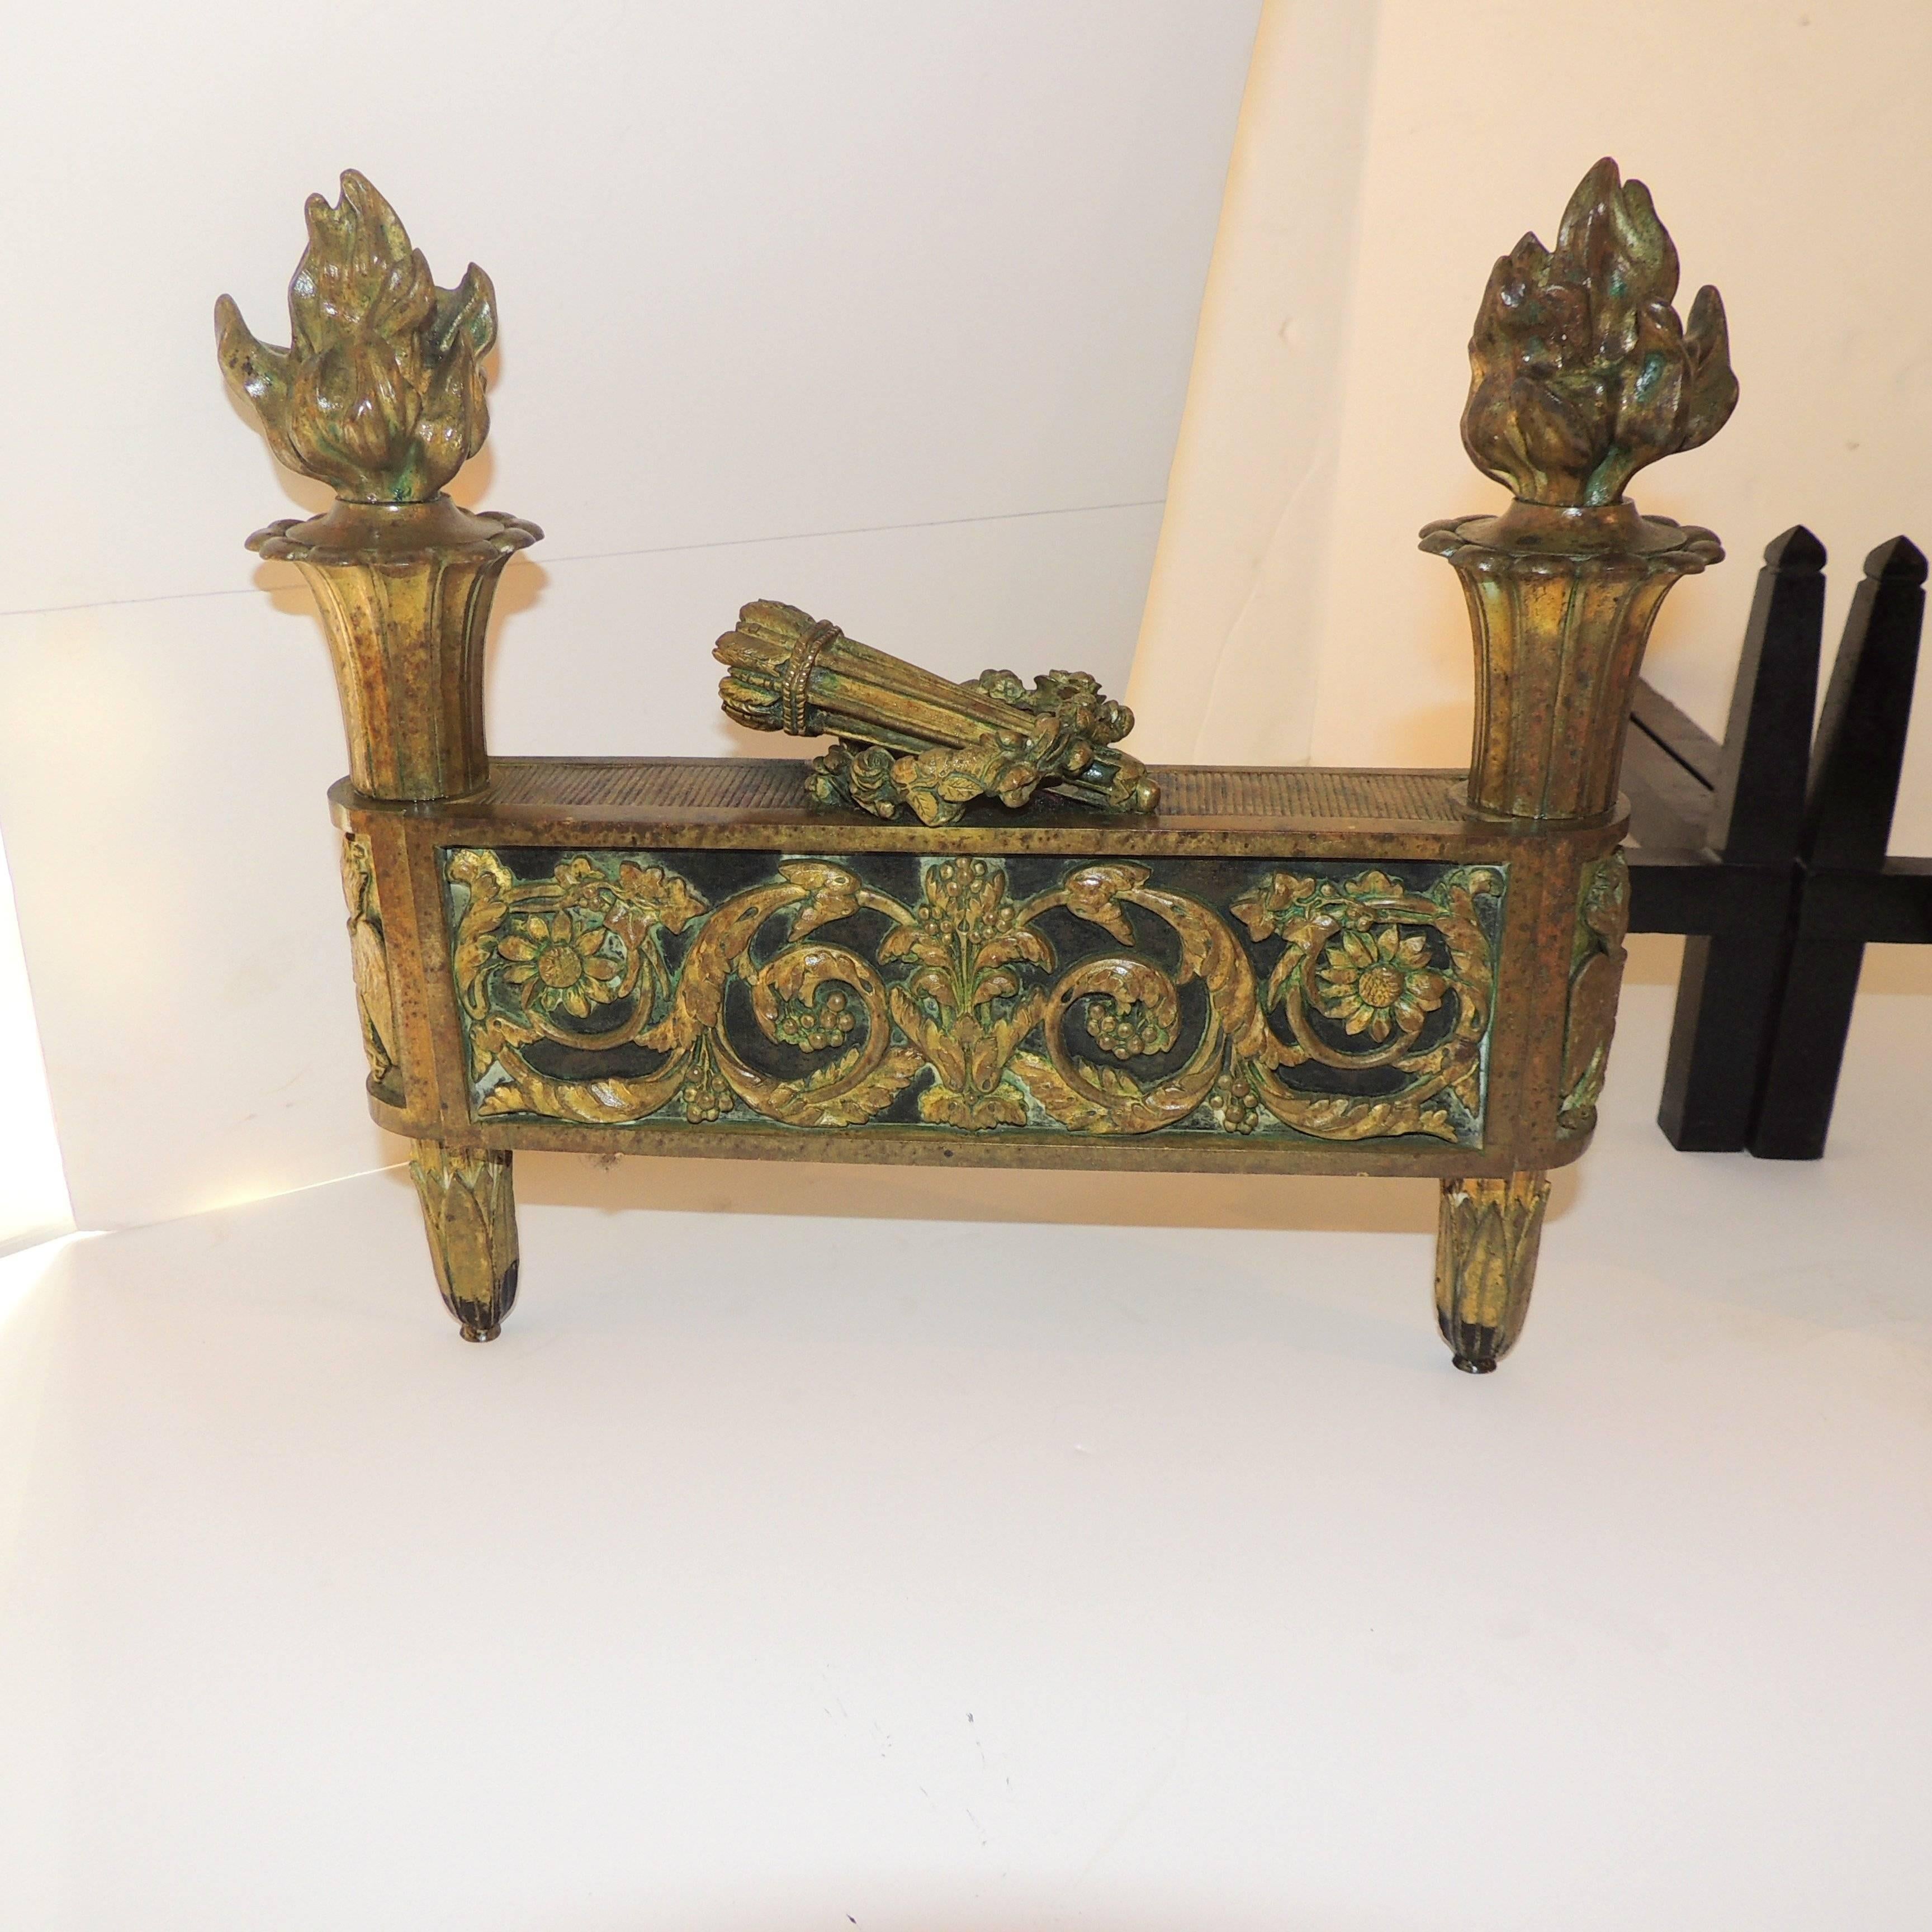 Wonderful French Neoclassical Gilt Dore Bronze with Black Marble Insert Chenets In Good Condition For Sale In Roslyn, NY